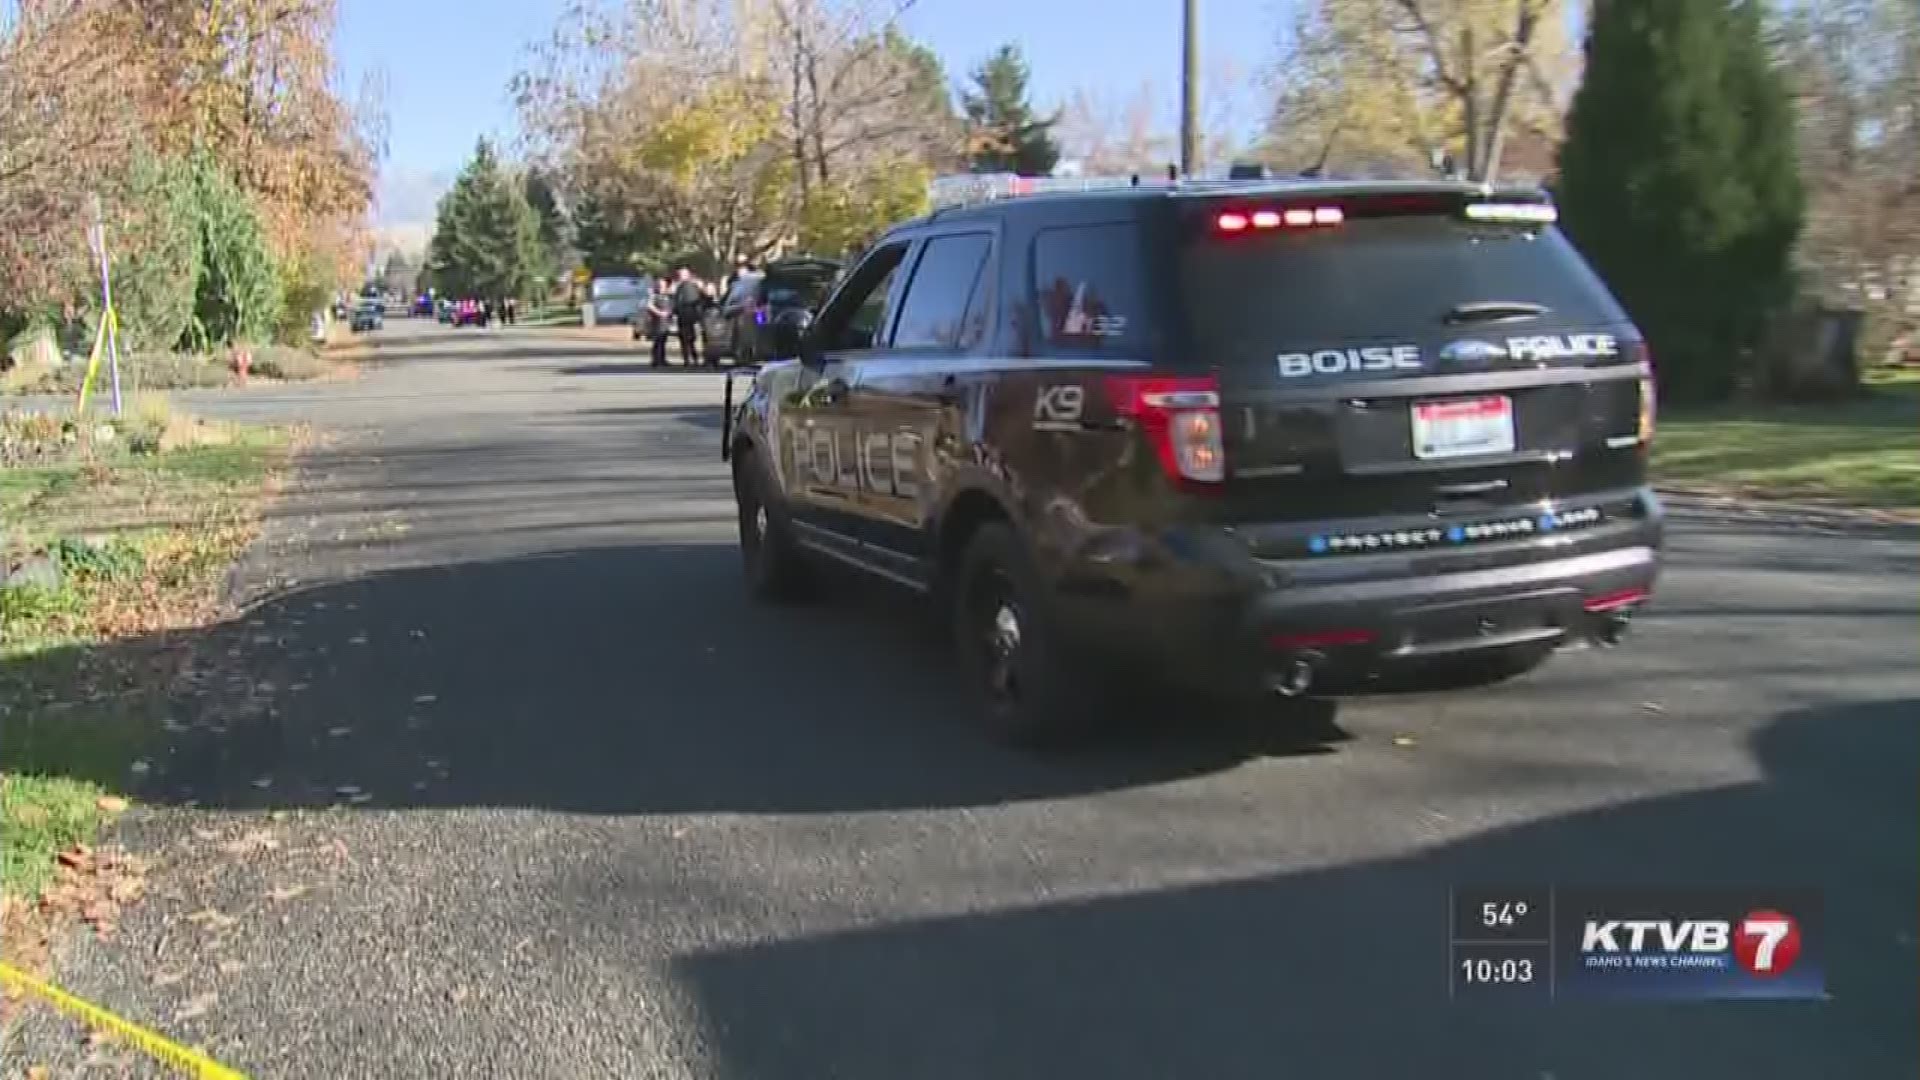 Officers and suspect shot after Boise manhunt.